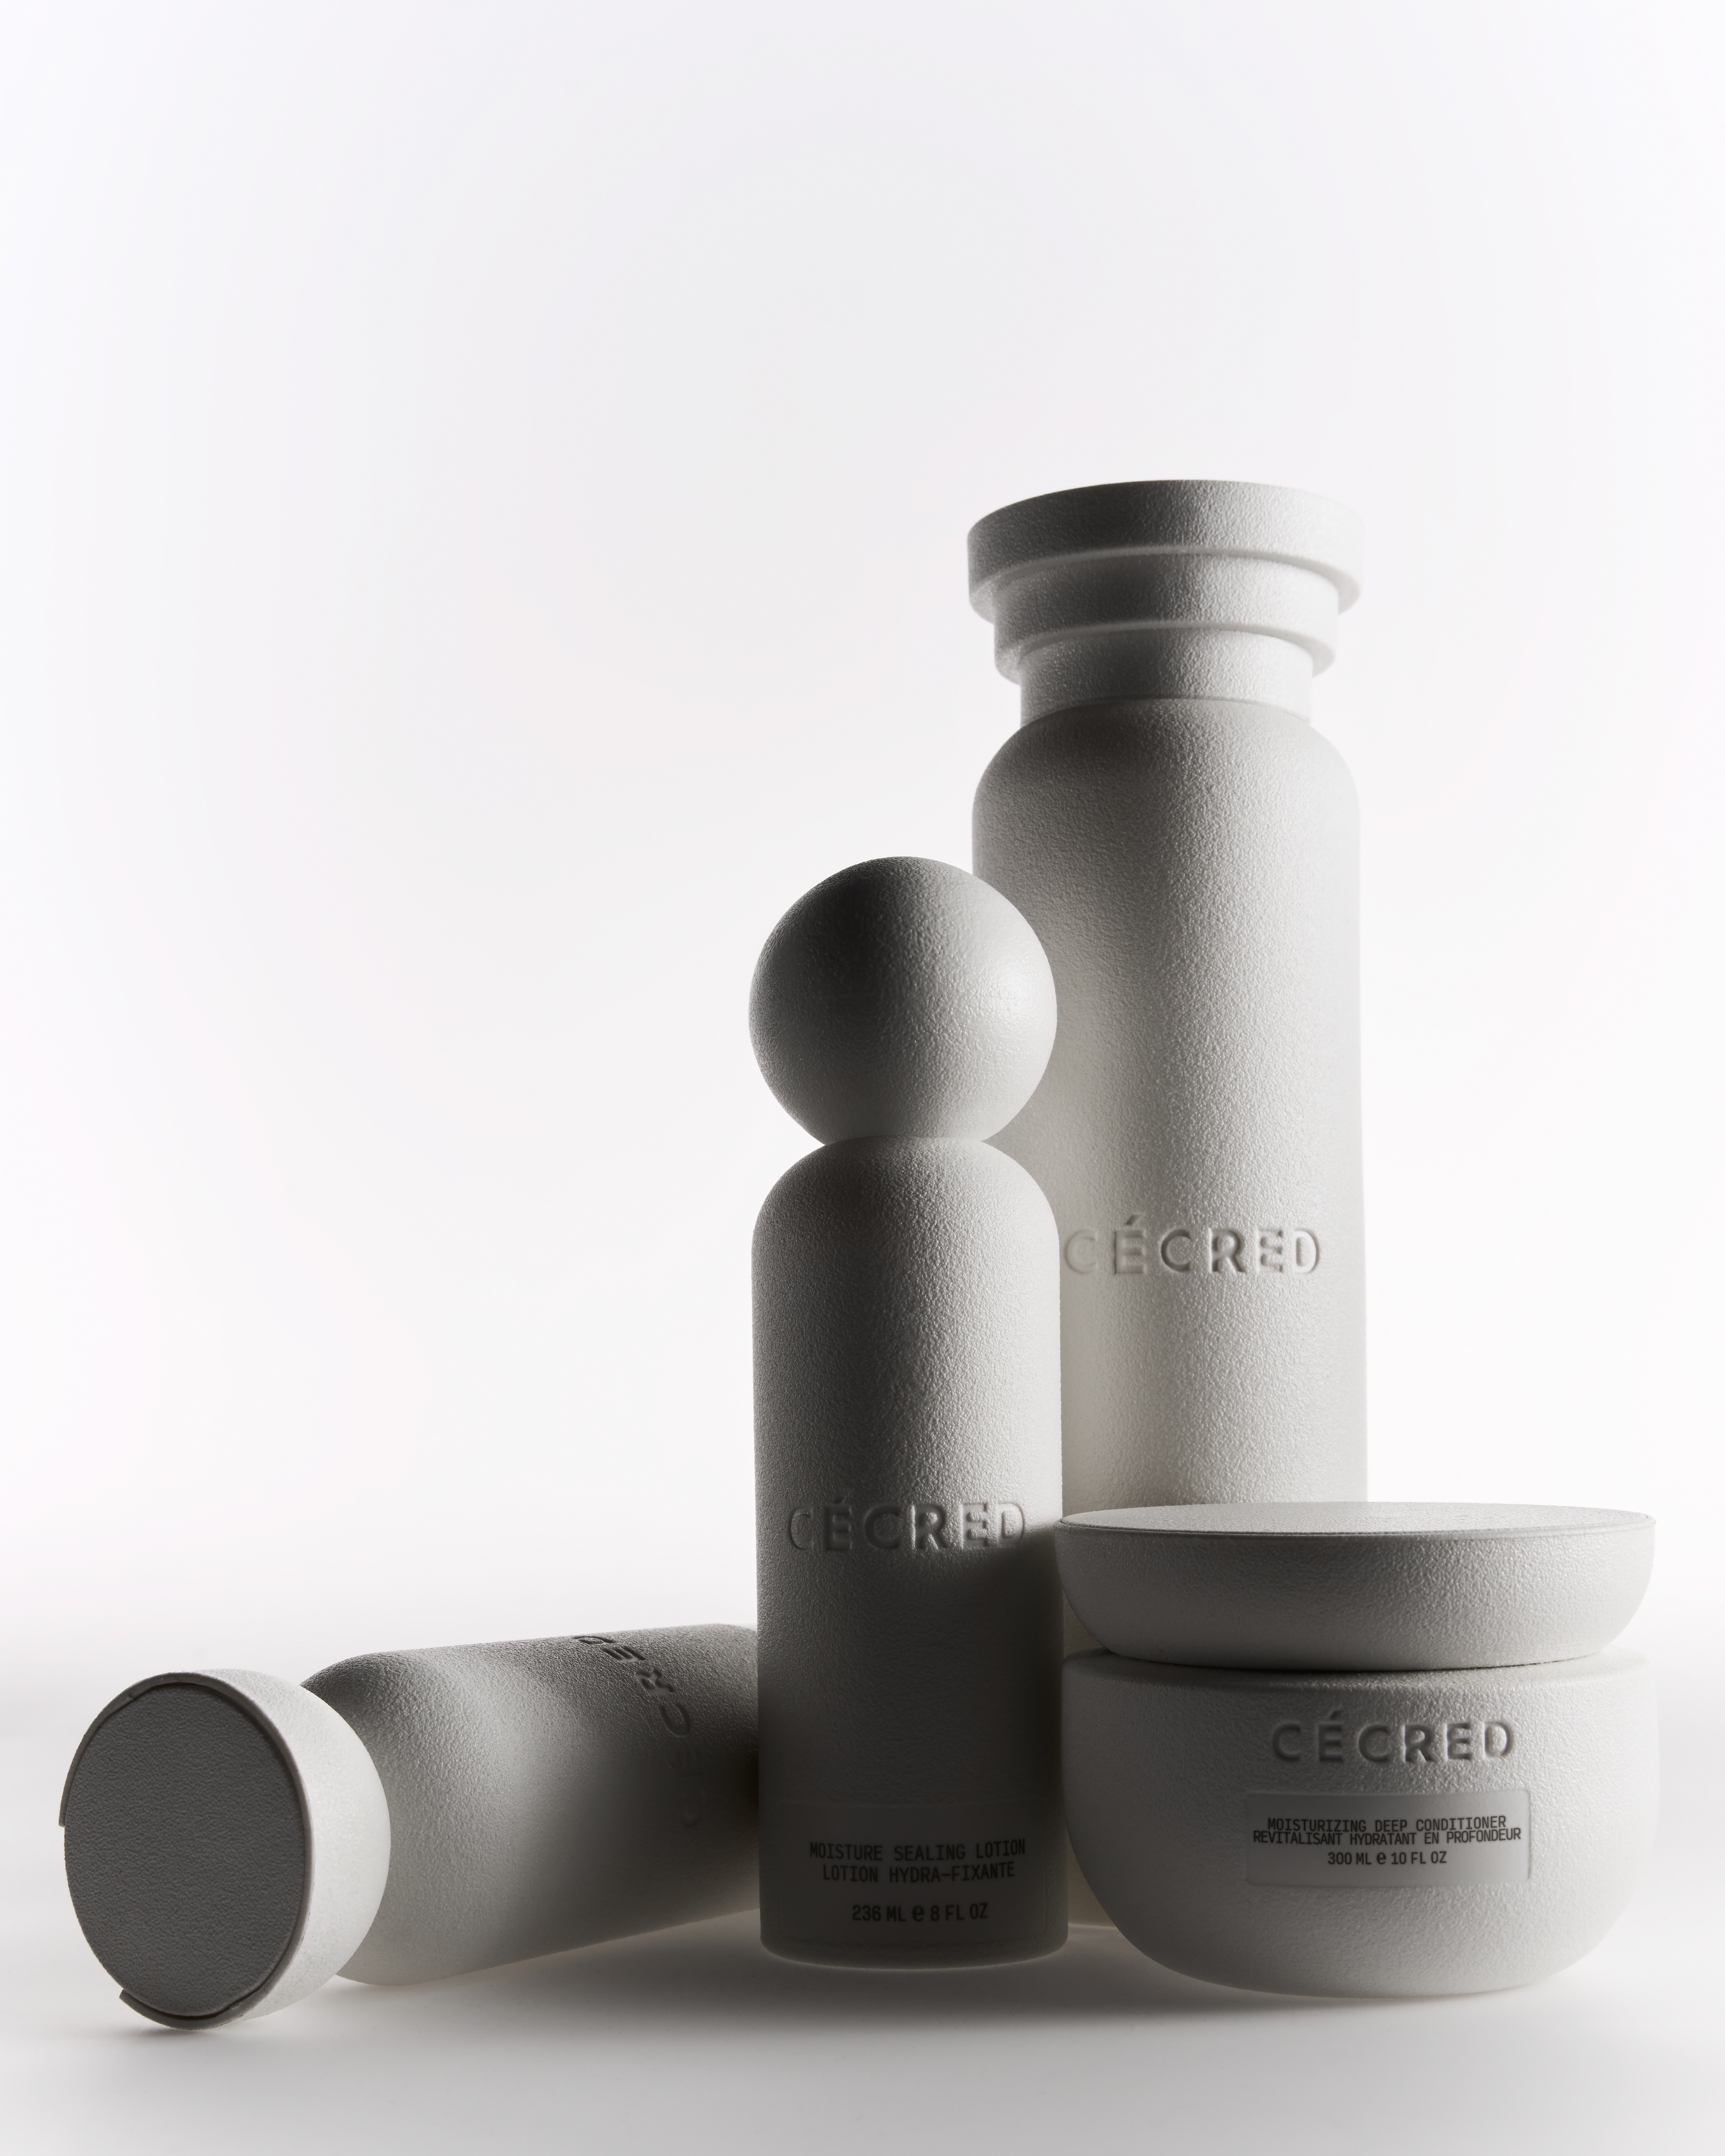 Cécred products